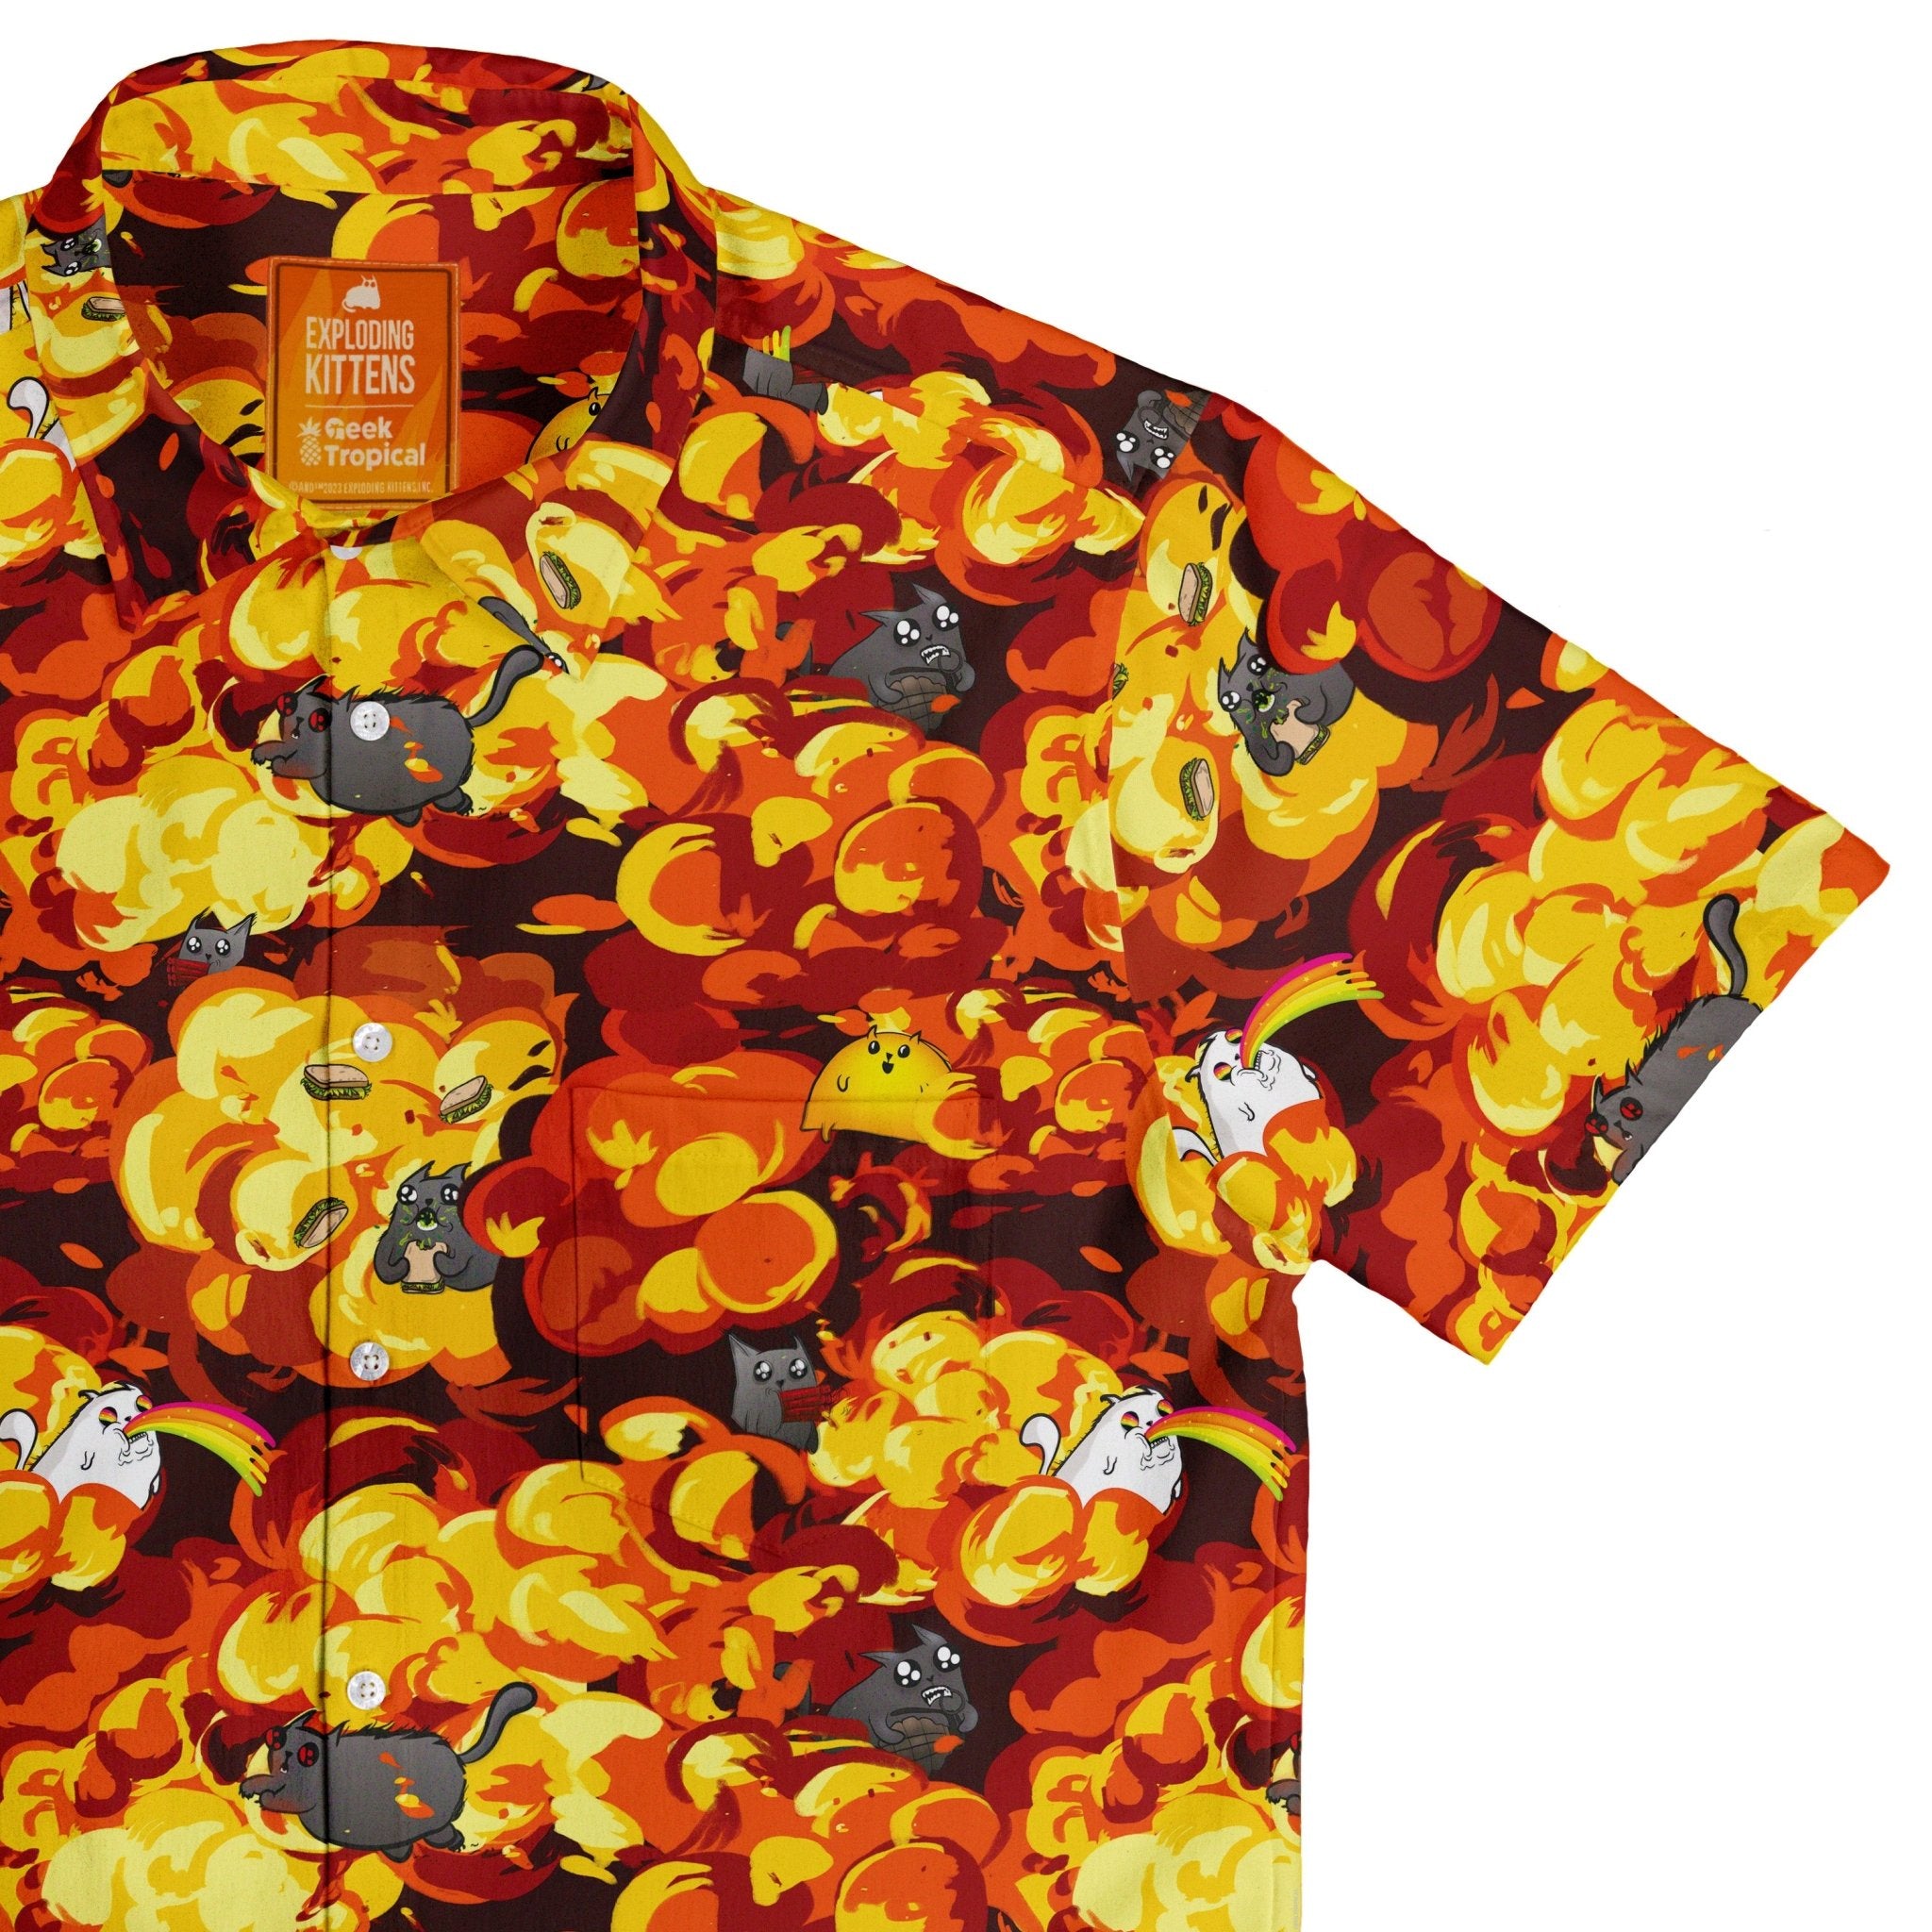 Ready-to-Ship Chaotic Exploding Kittens Button Up Shirt - adult sizing - Animal Patterns - board game print